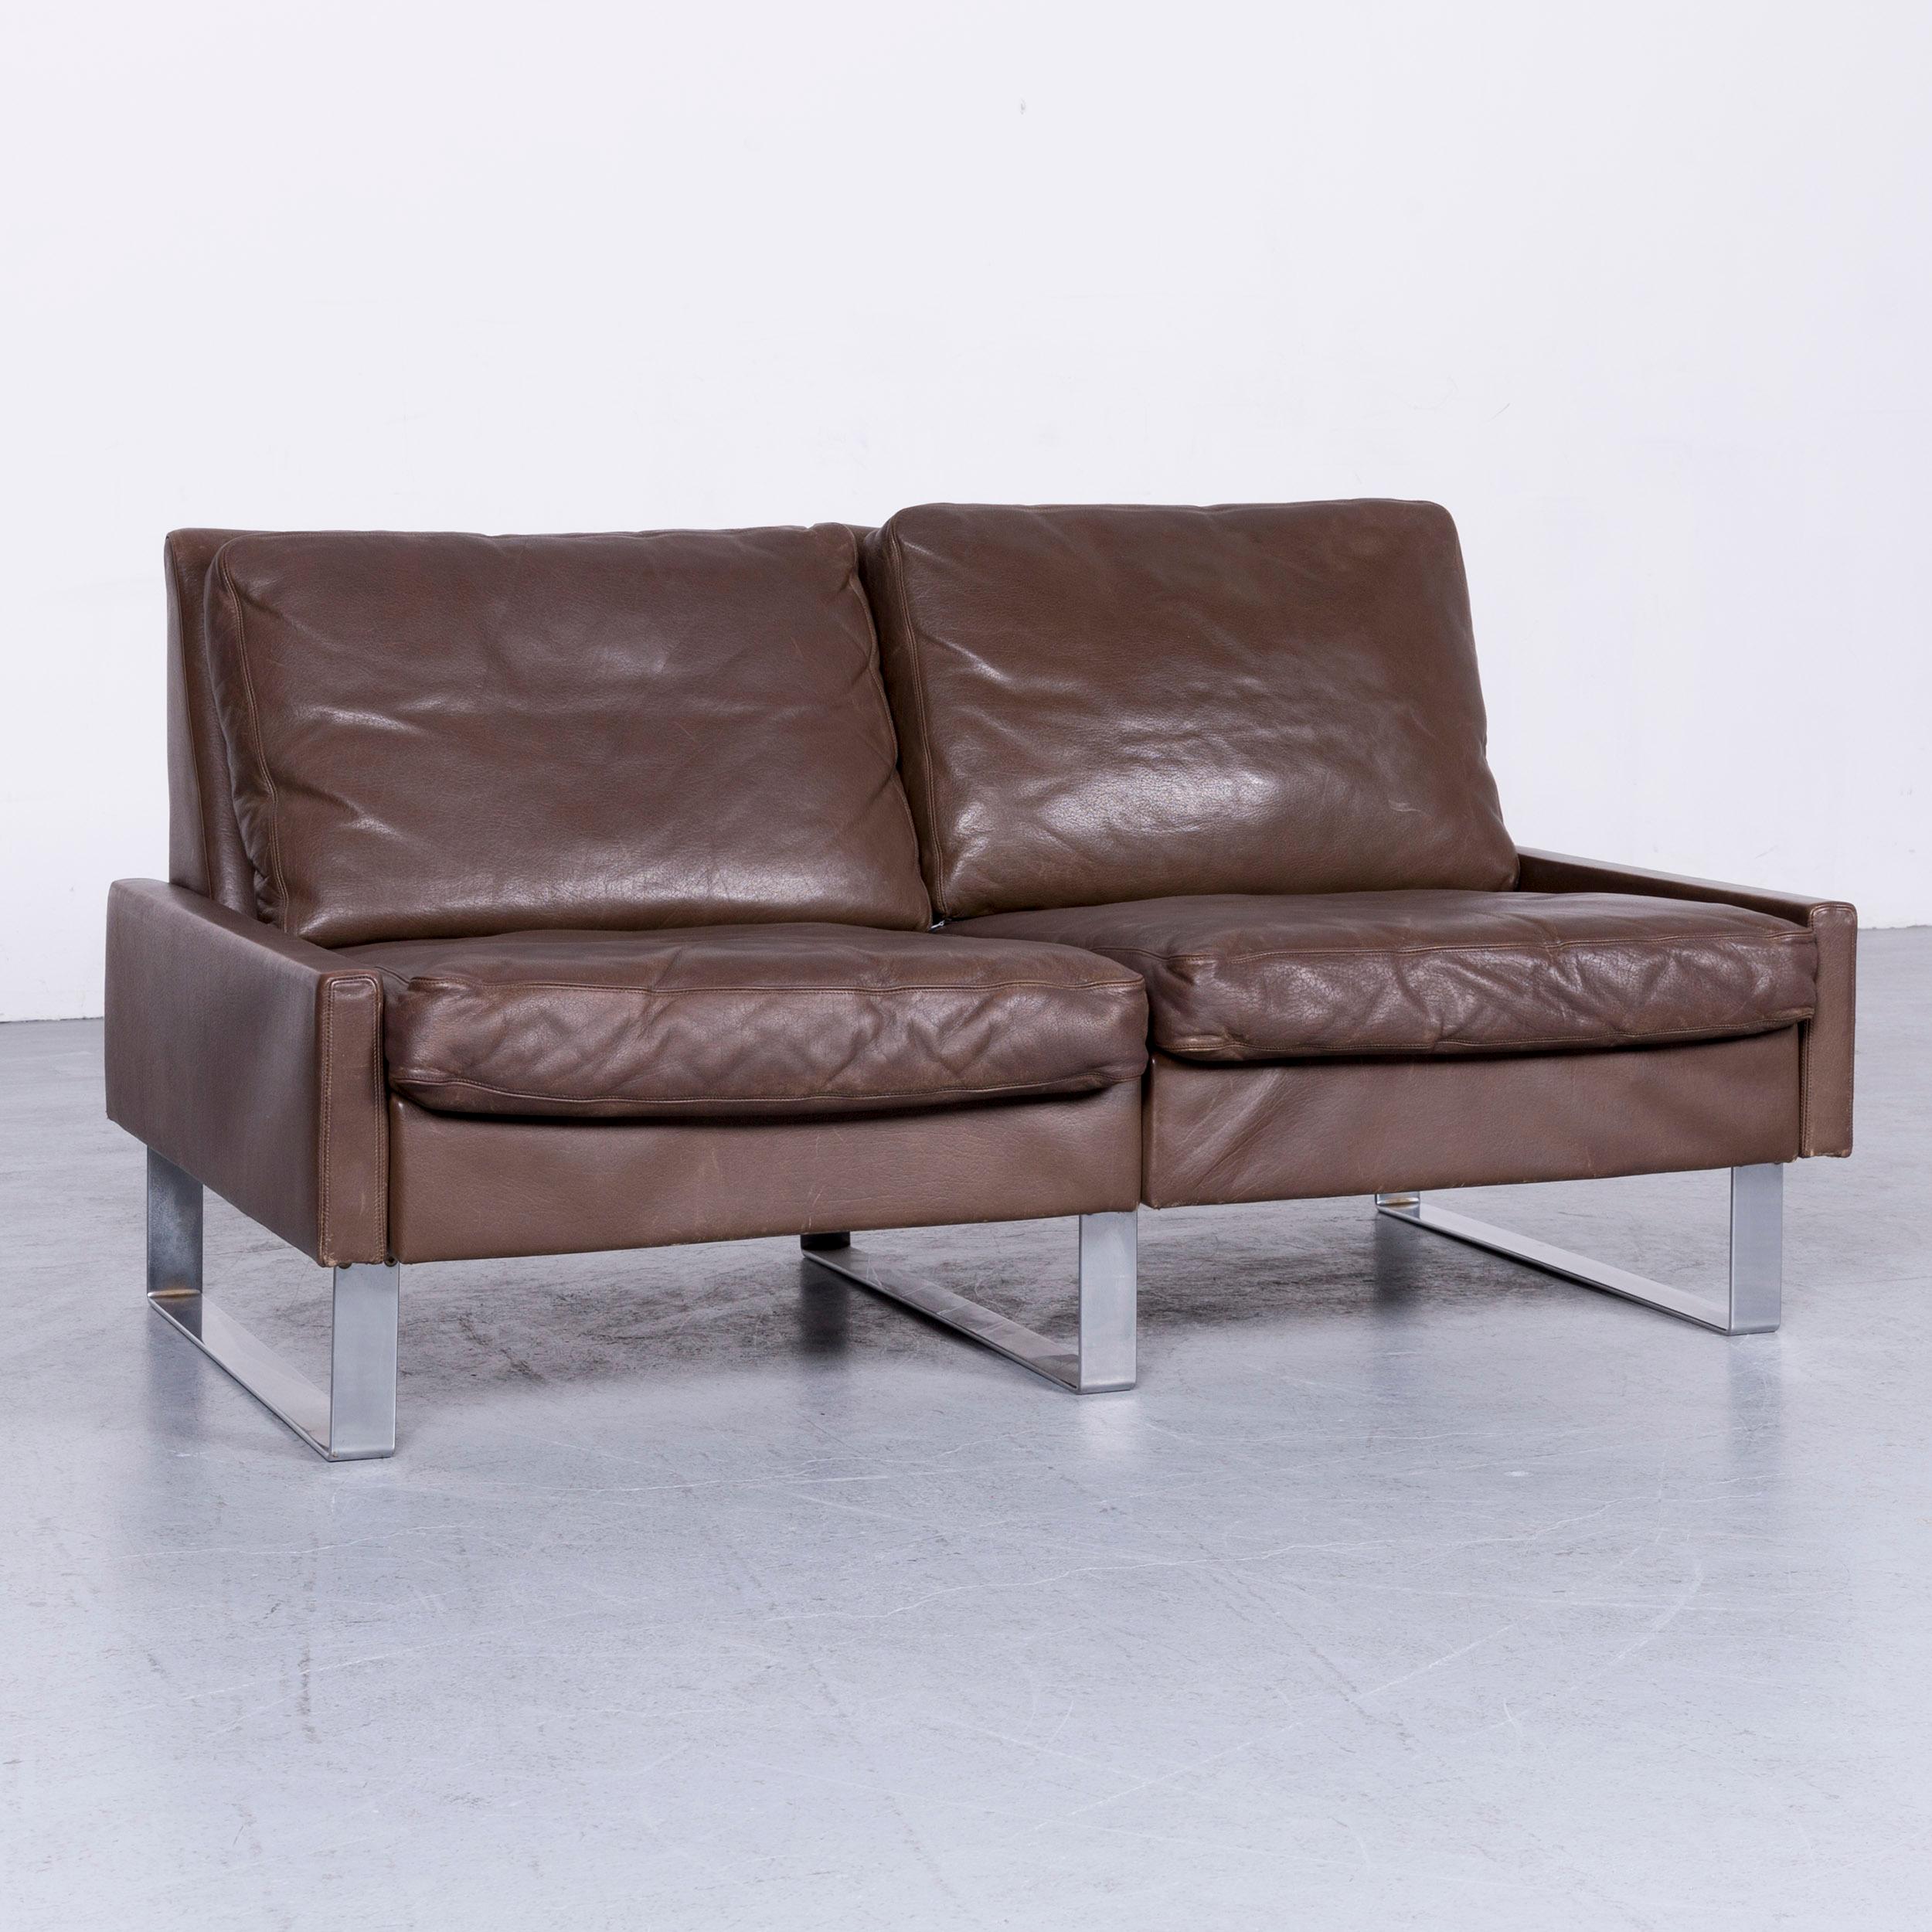 German COR Conseta Leather Sofa Brown Leather Two-Seat Couch